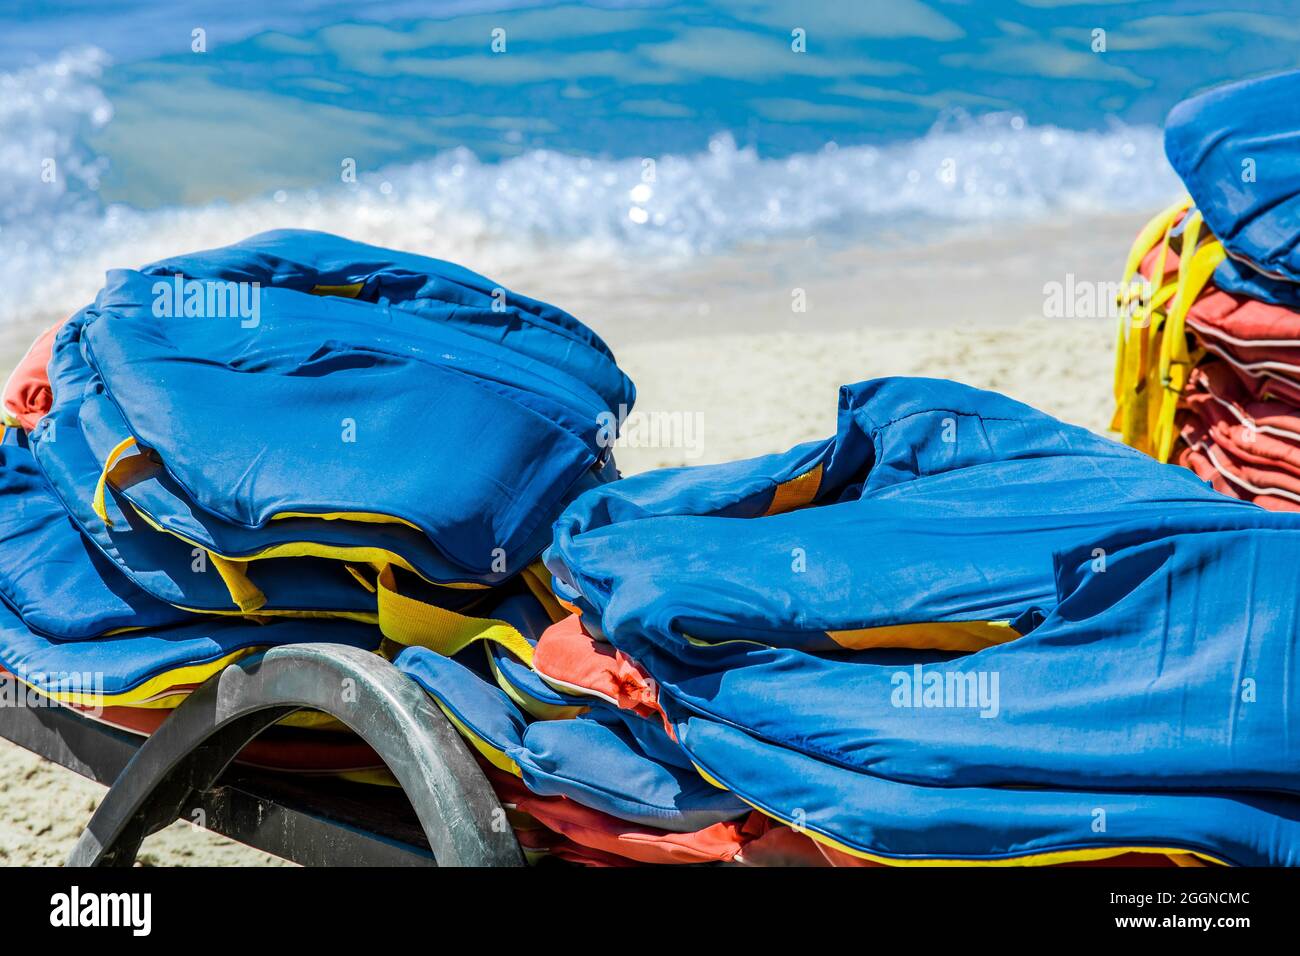 Life jackets, protection and safety of life on the water against the background of the sea. Stock Photo